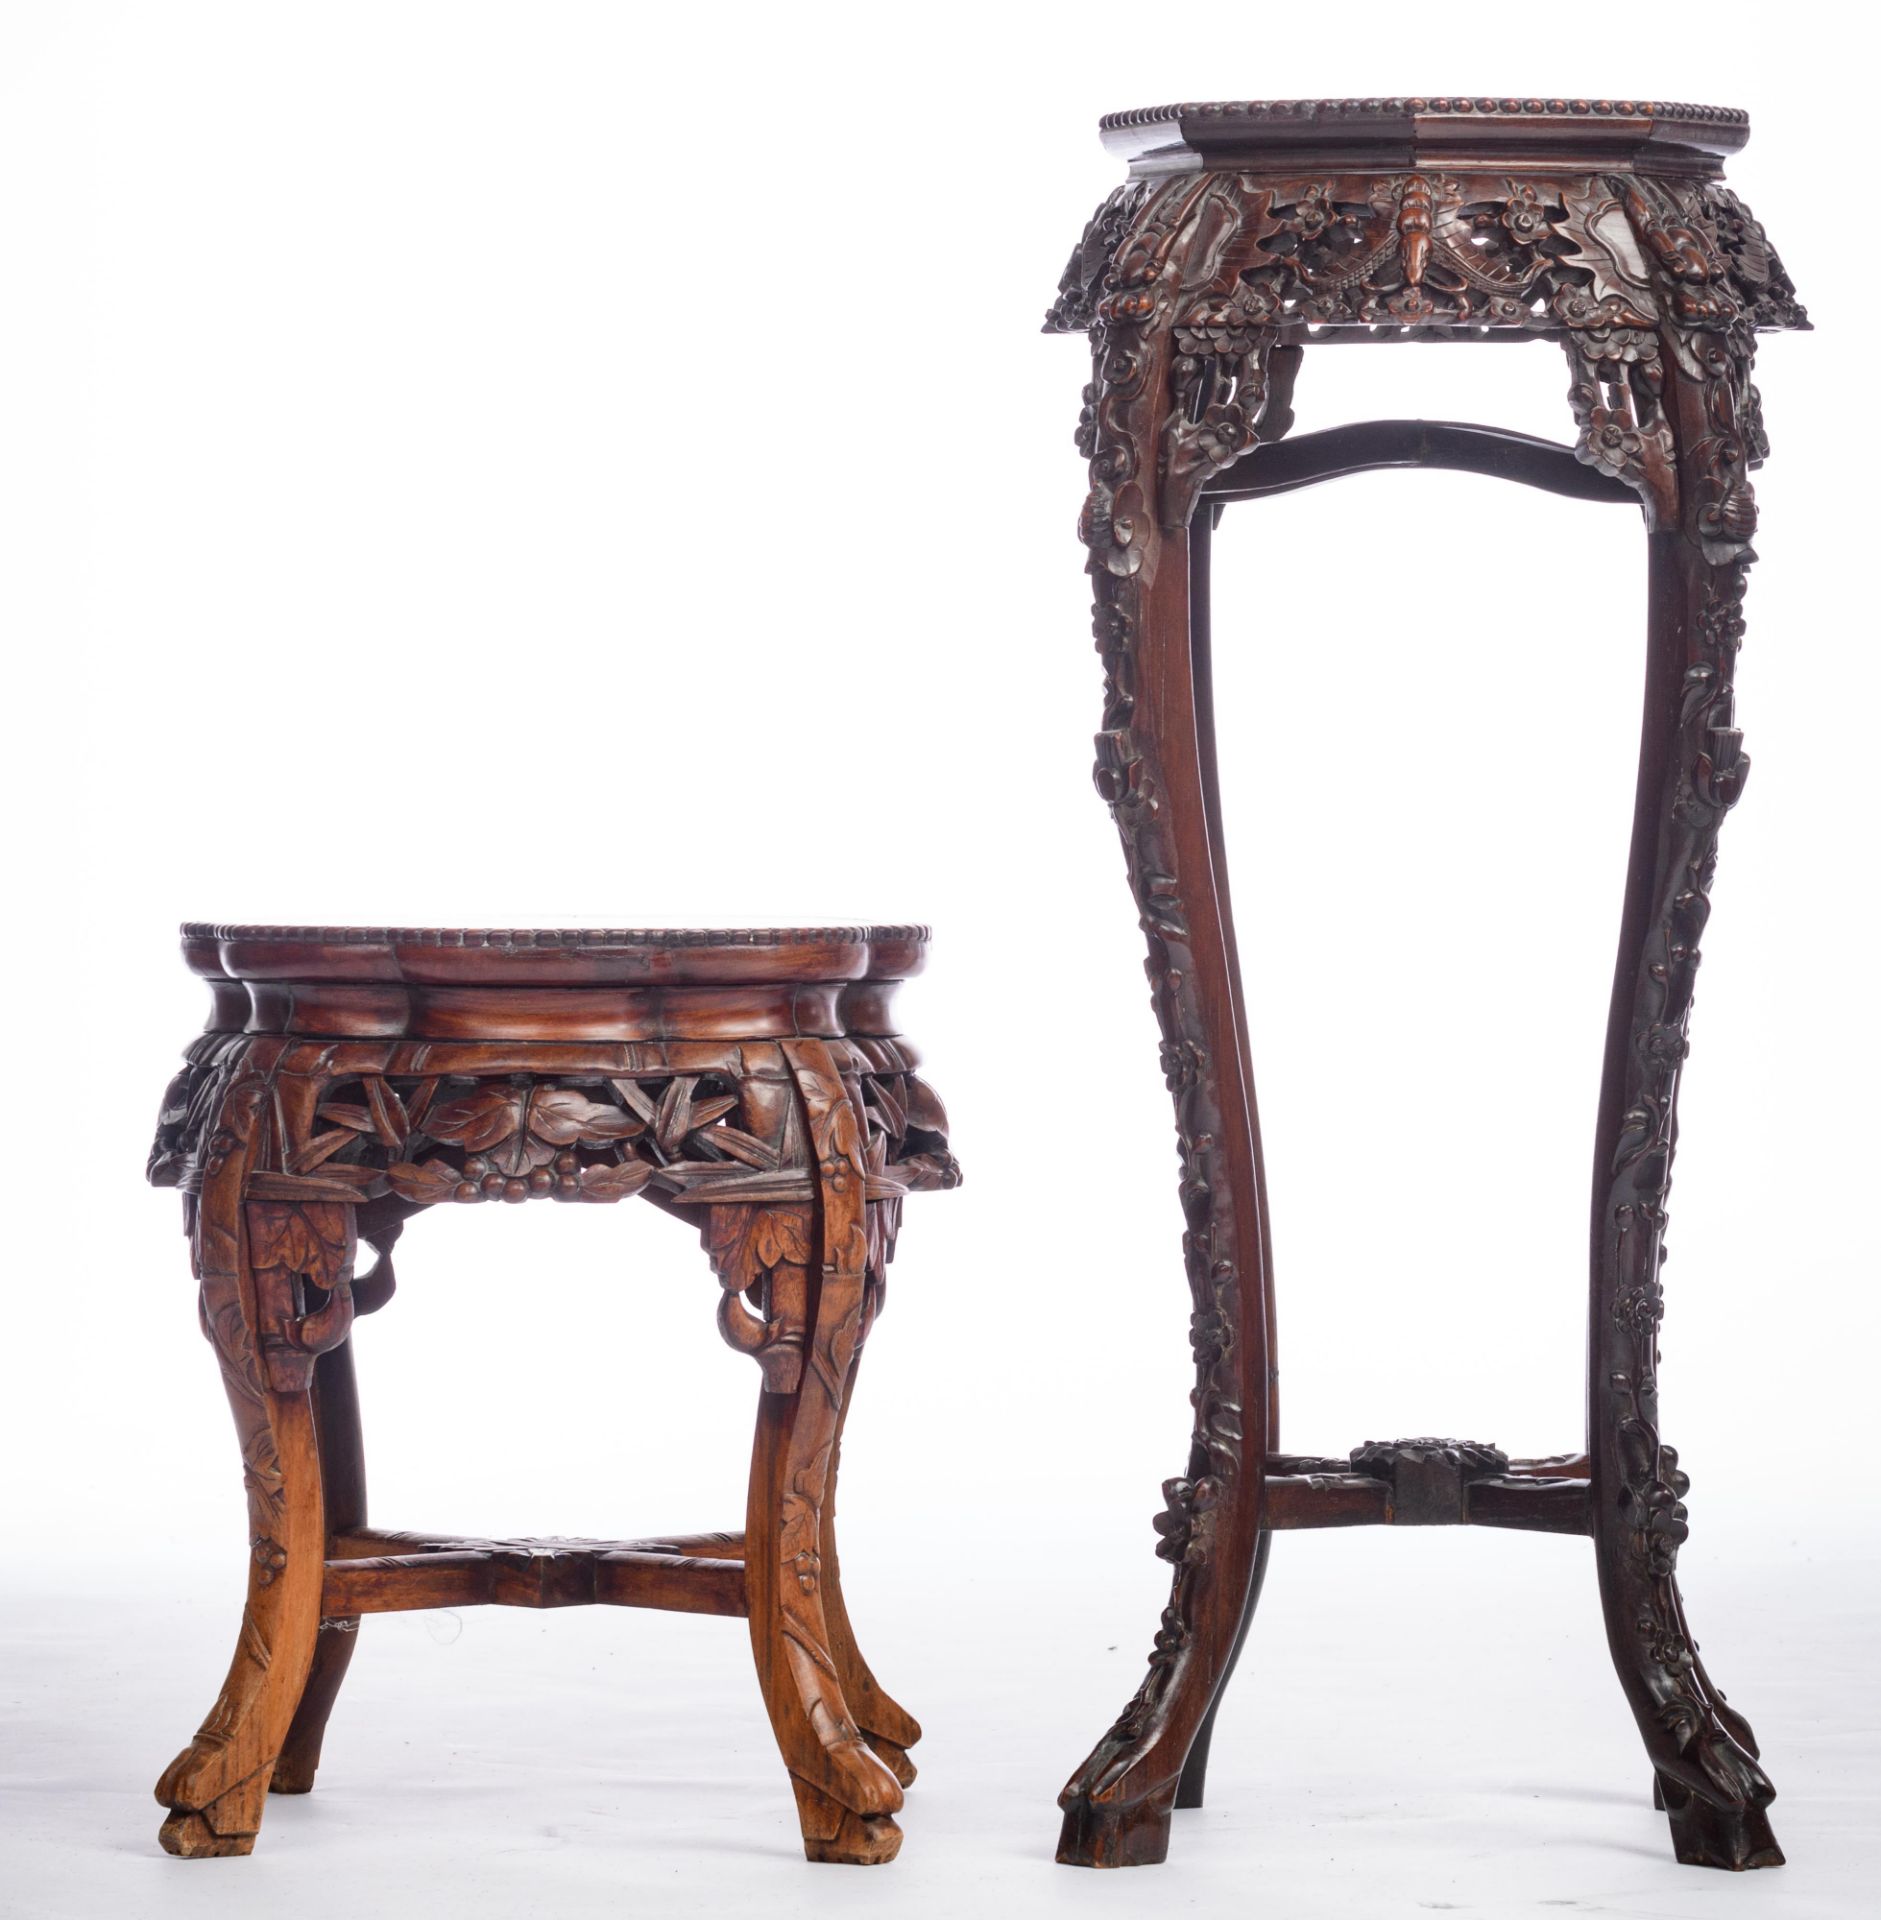 Two Chinese richly carved exotic hardwood stands, H 48 - 91 - W 40 - 42 cm - Image 2 of 7